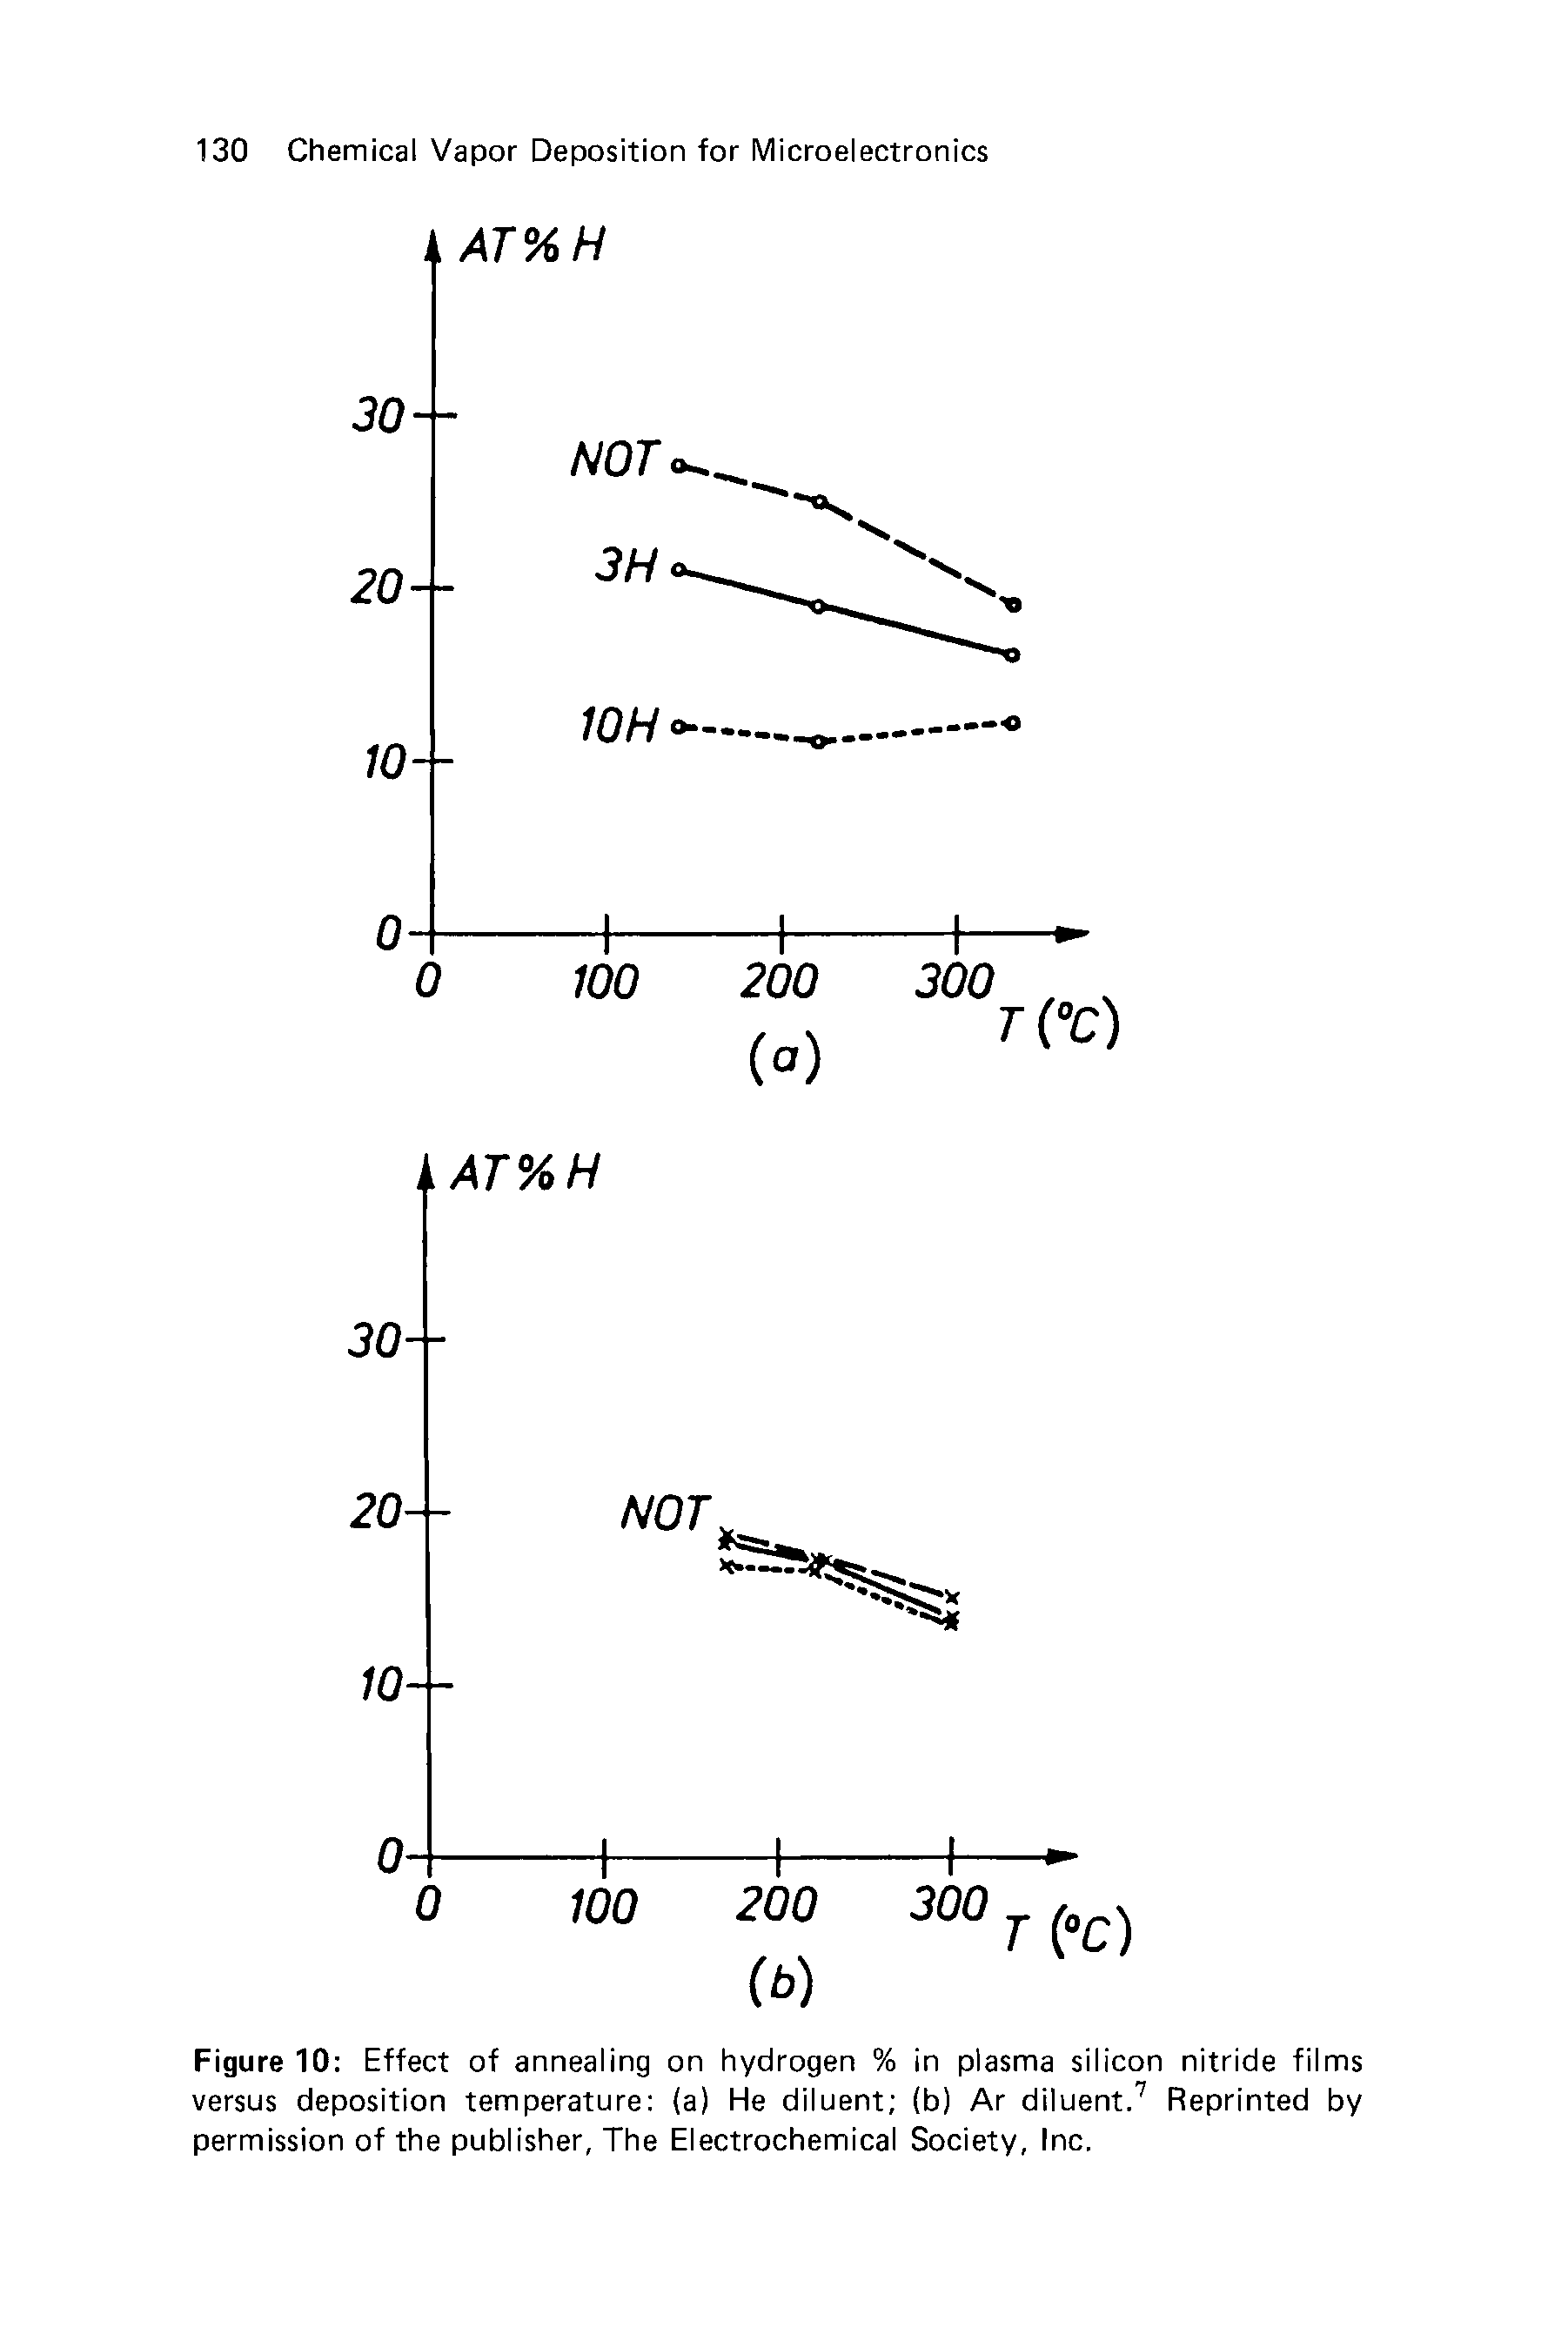 Figure 10 Effect of annealing on hydrogen % in plasma silicon nitride films versus deposition temperature (a) He diluent (b) Ar diluent.7 Reprinted by permission of the publisher, The Electrochemical Society, Inc.